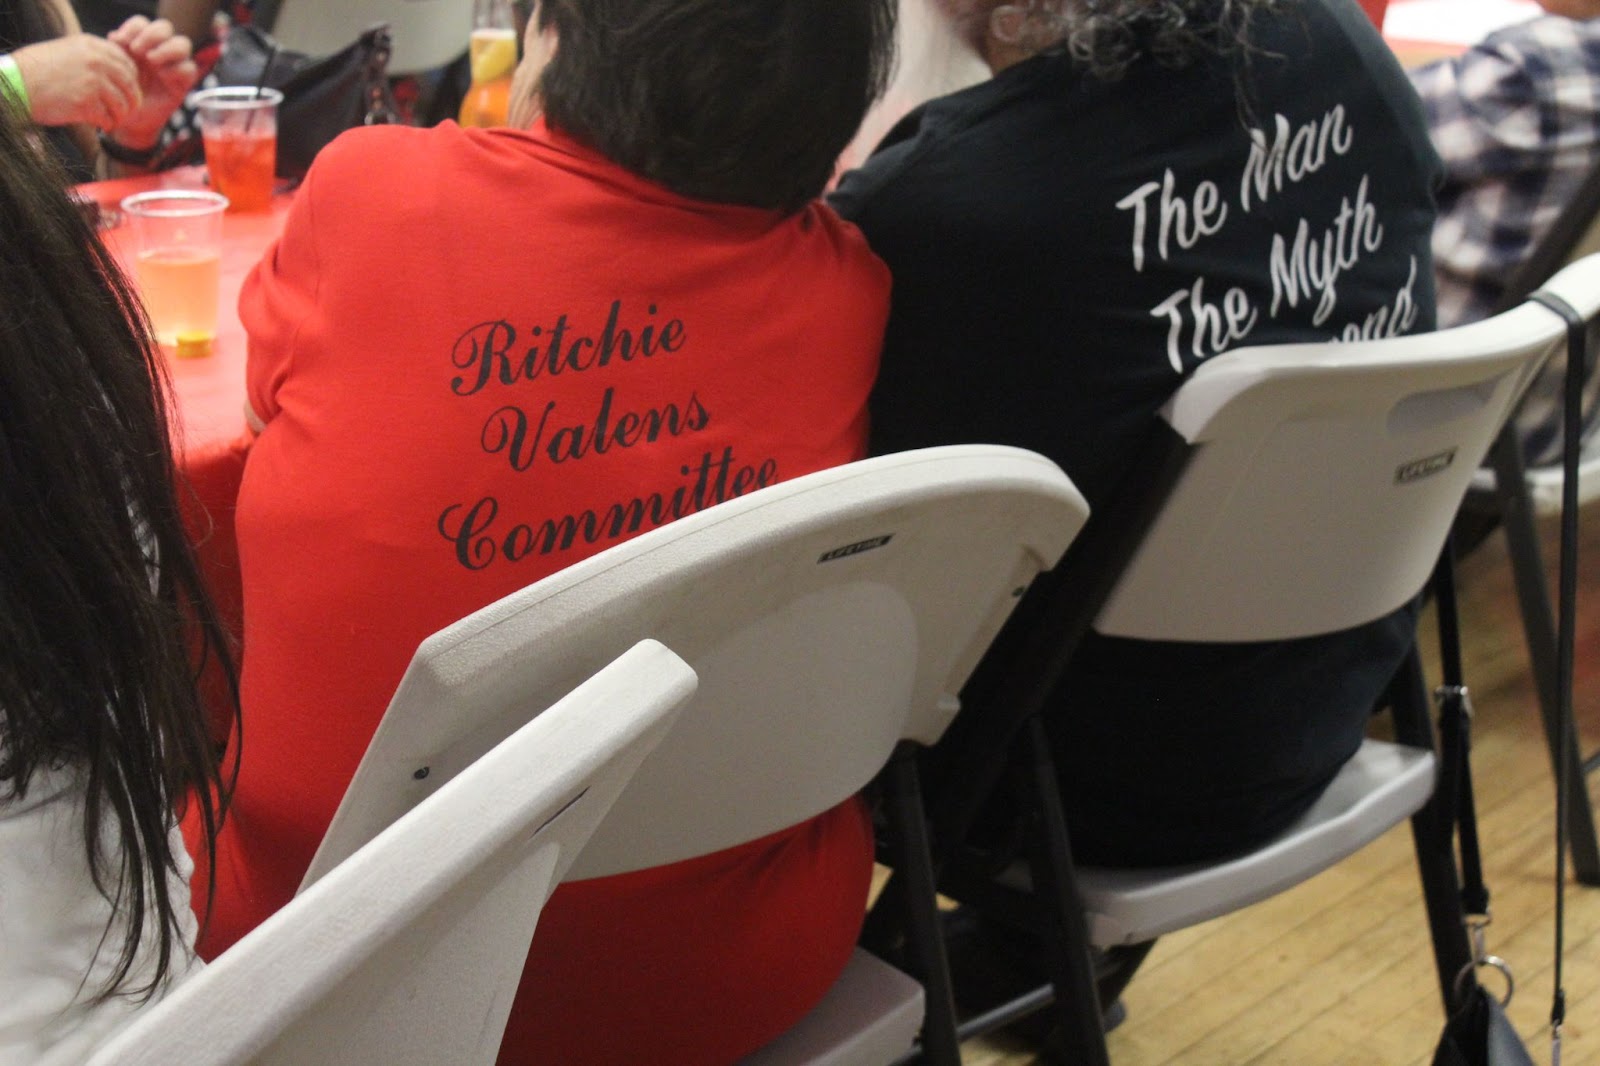 The family of Ritchie Valens is seated at the KROJ benefit concert